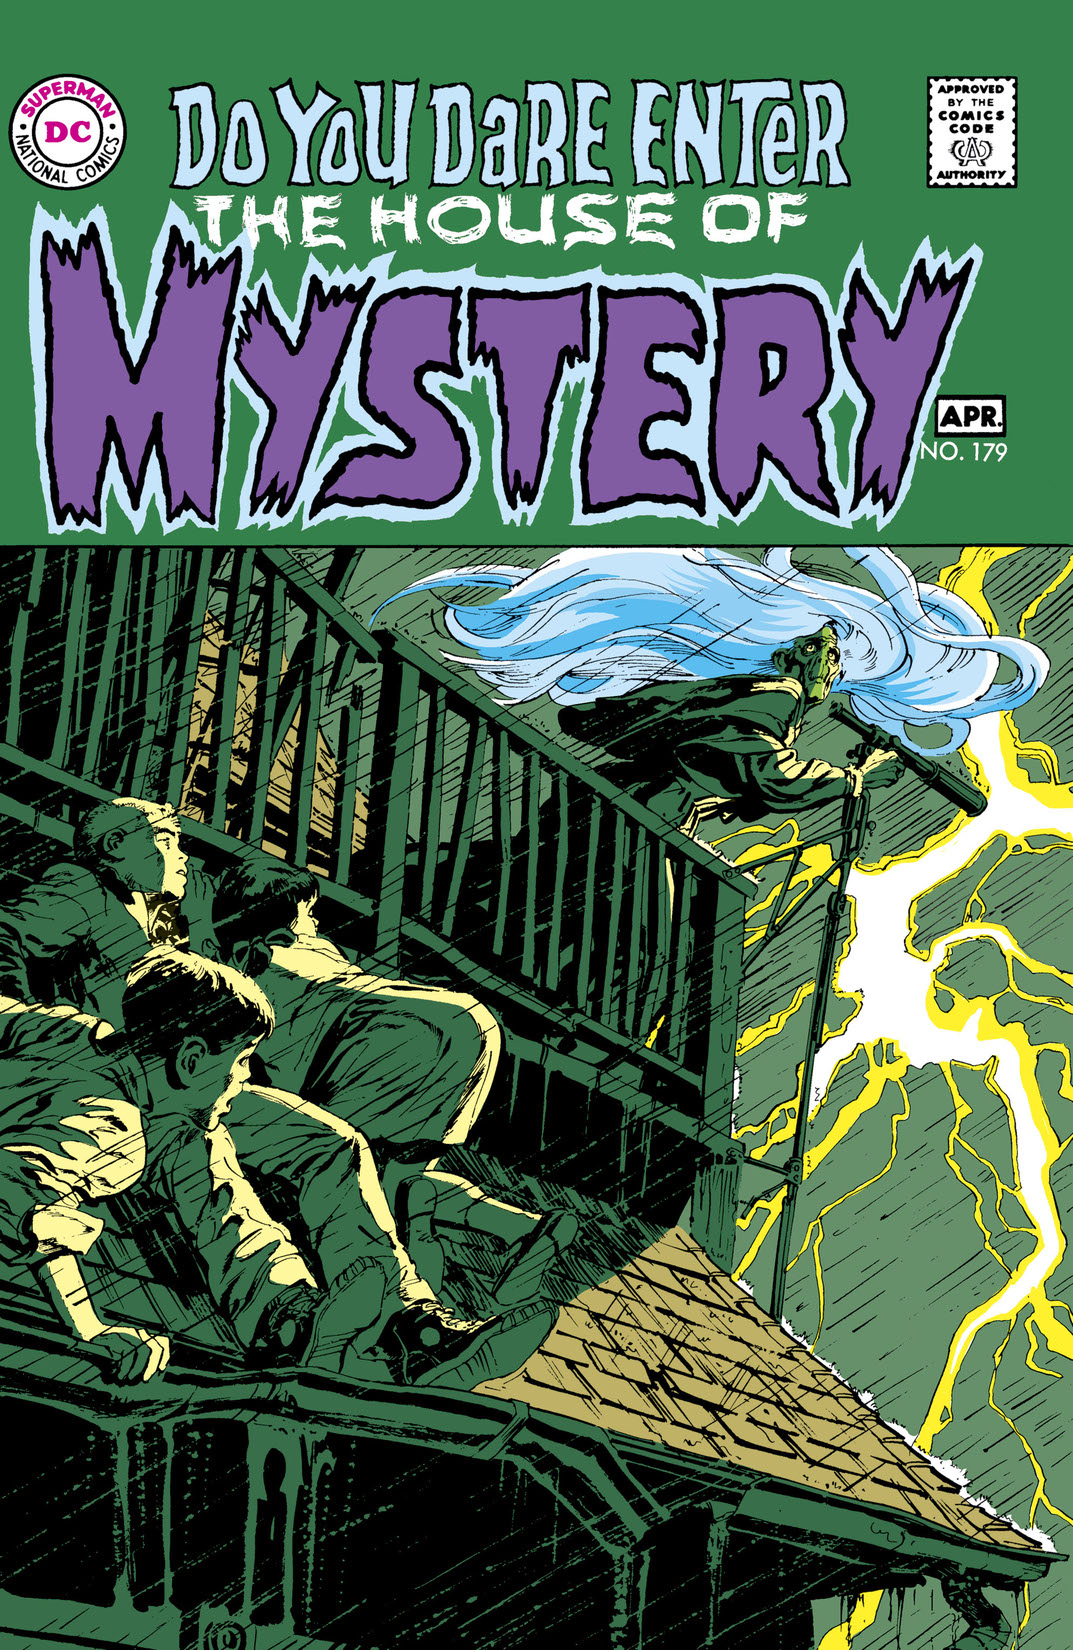 House of Mystery (1951-) #179 preview images